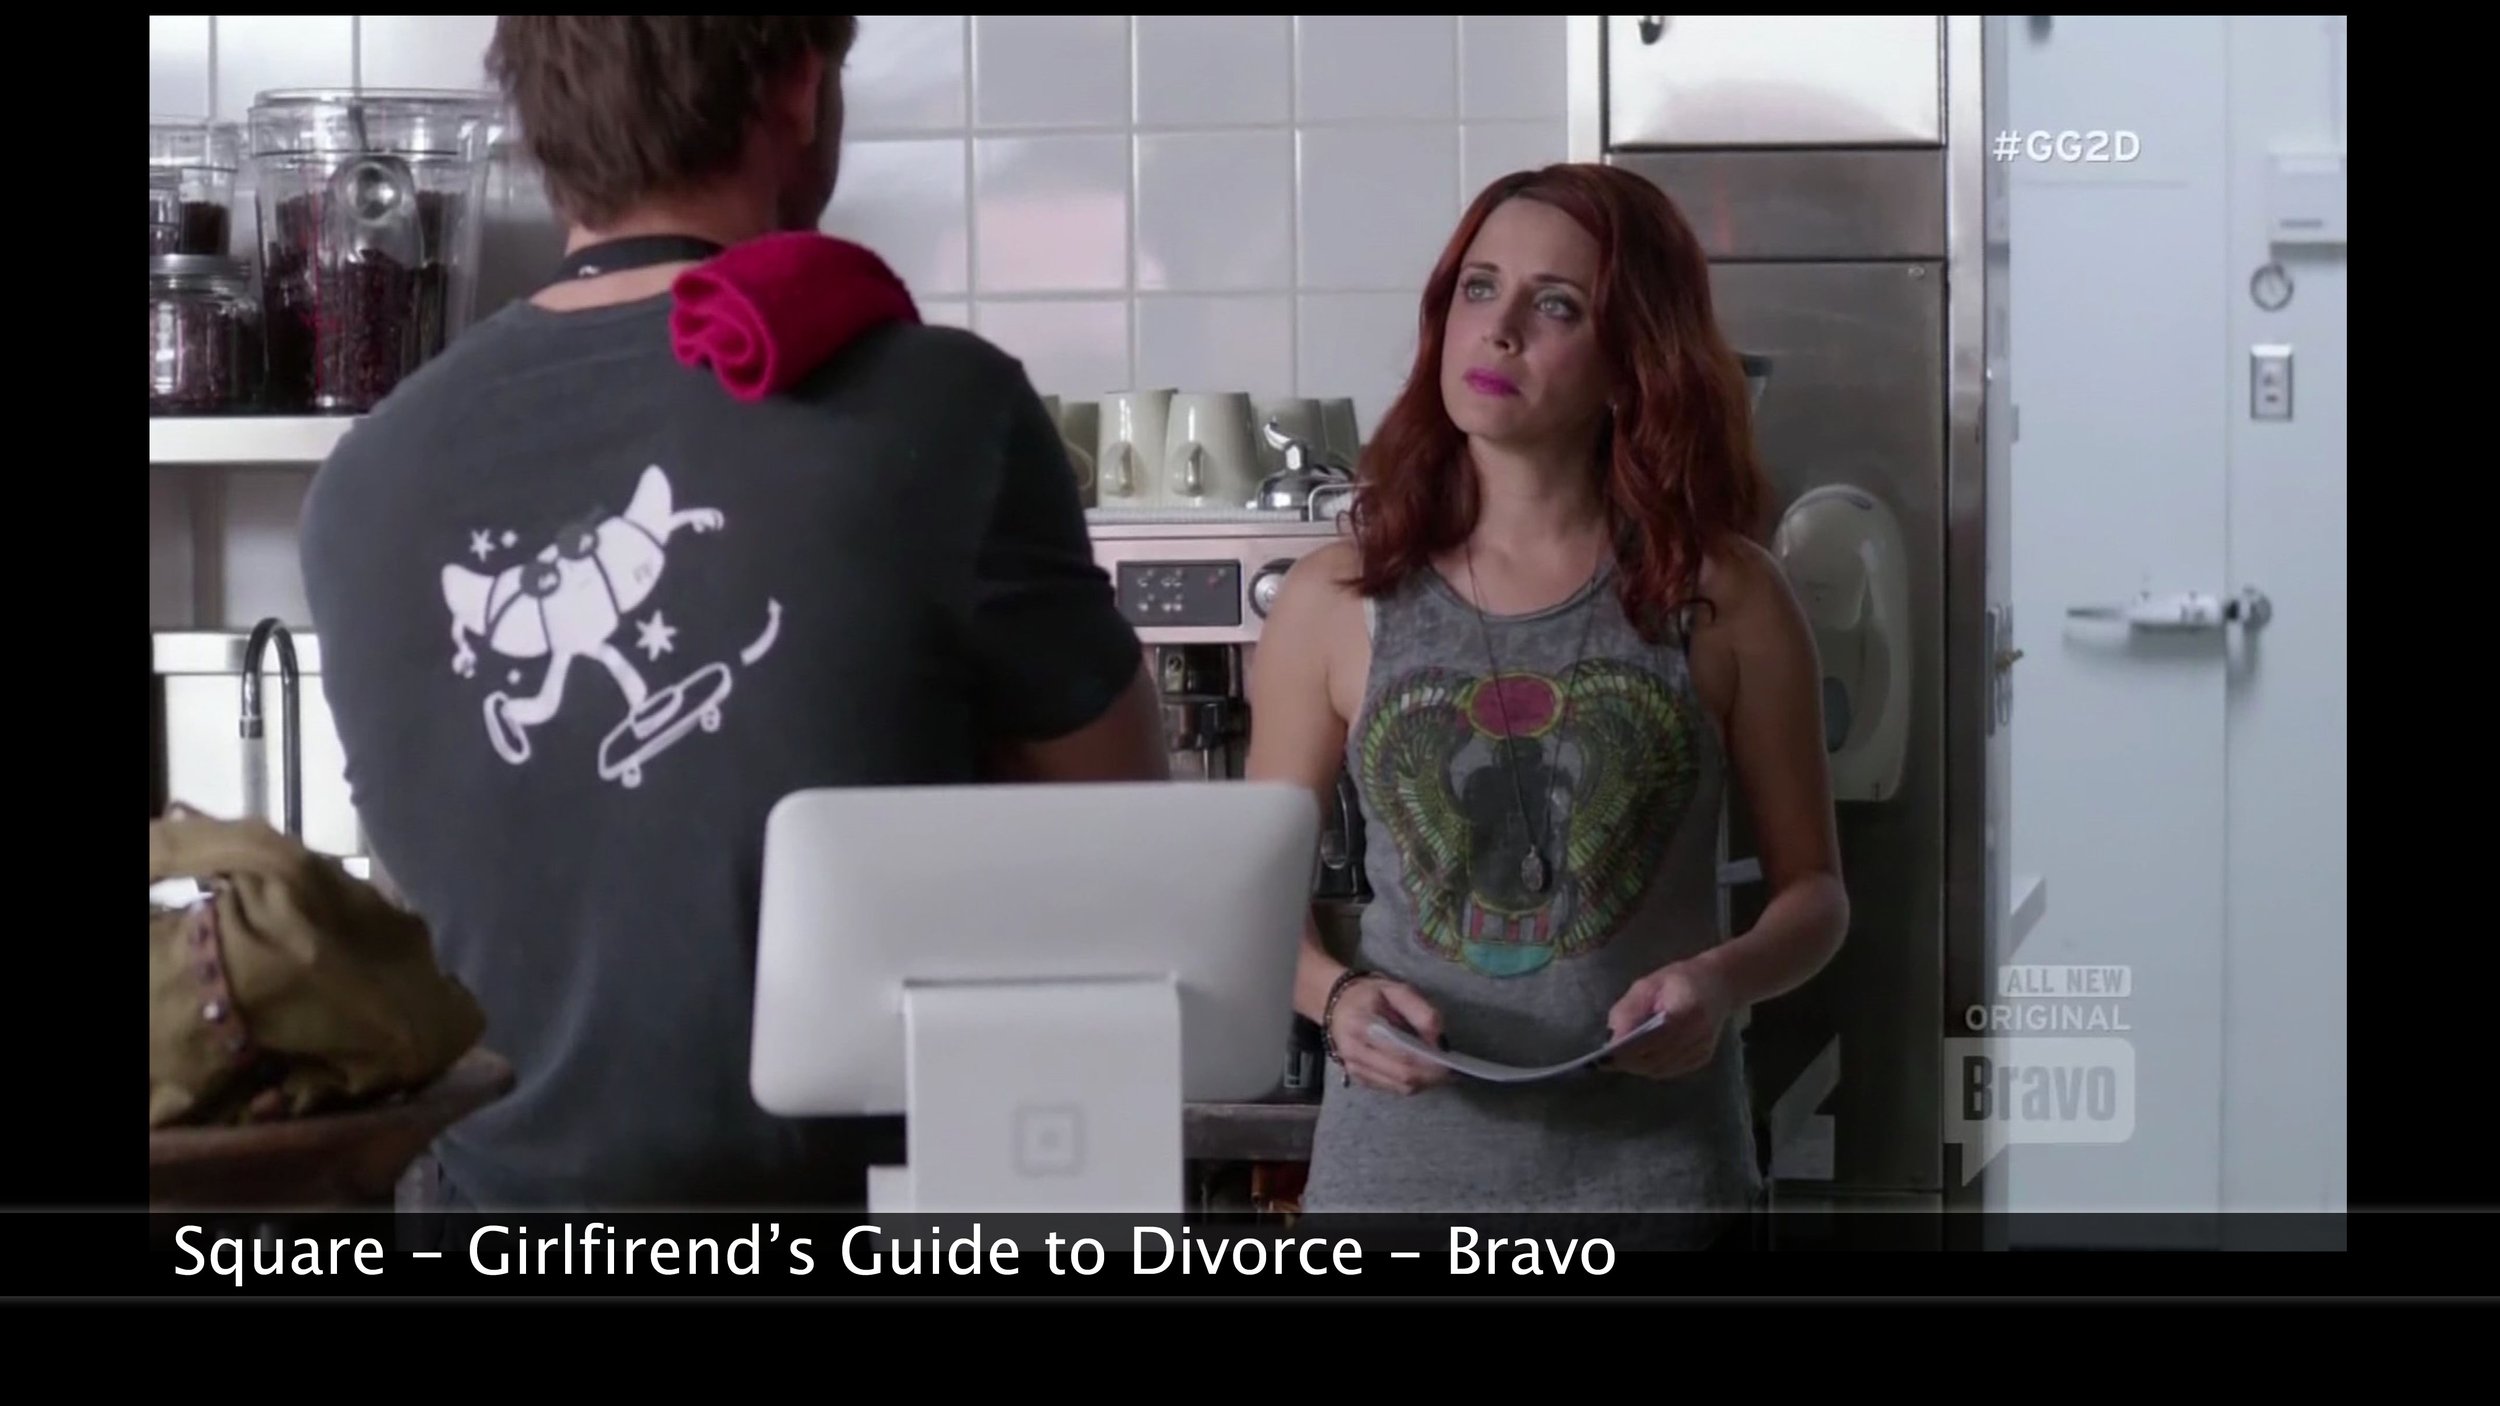 +Square - Girlfriends Guide to Divorce - RuleNo81TheresNoCryinginPorn209-1164.jpg